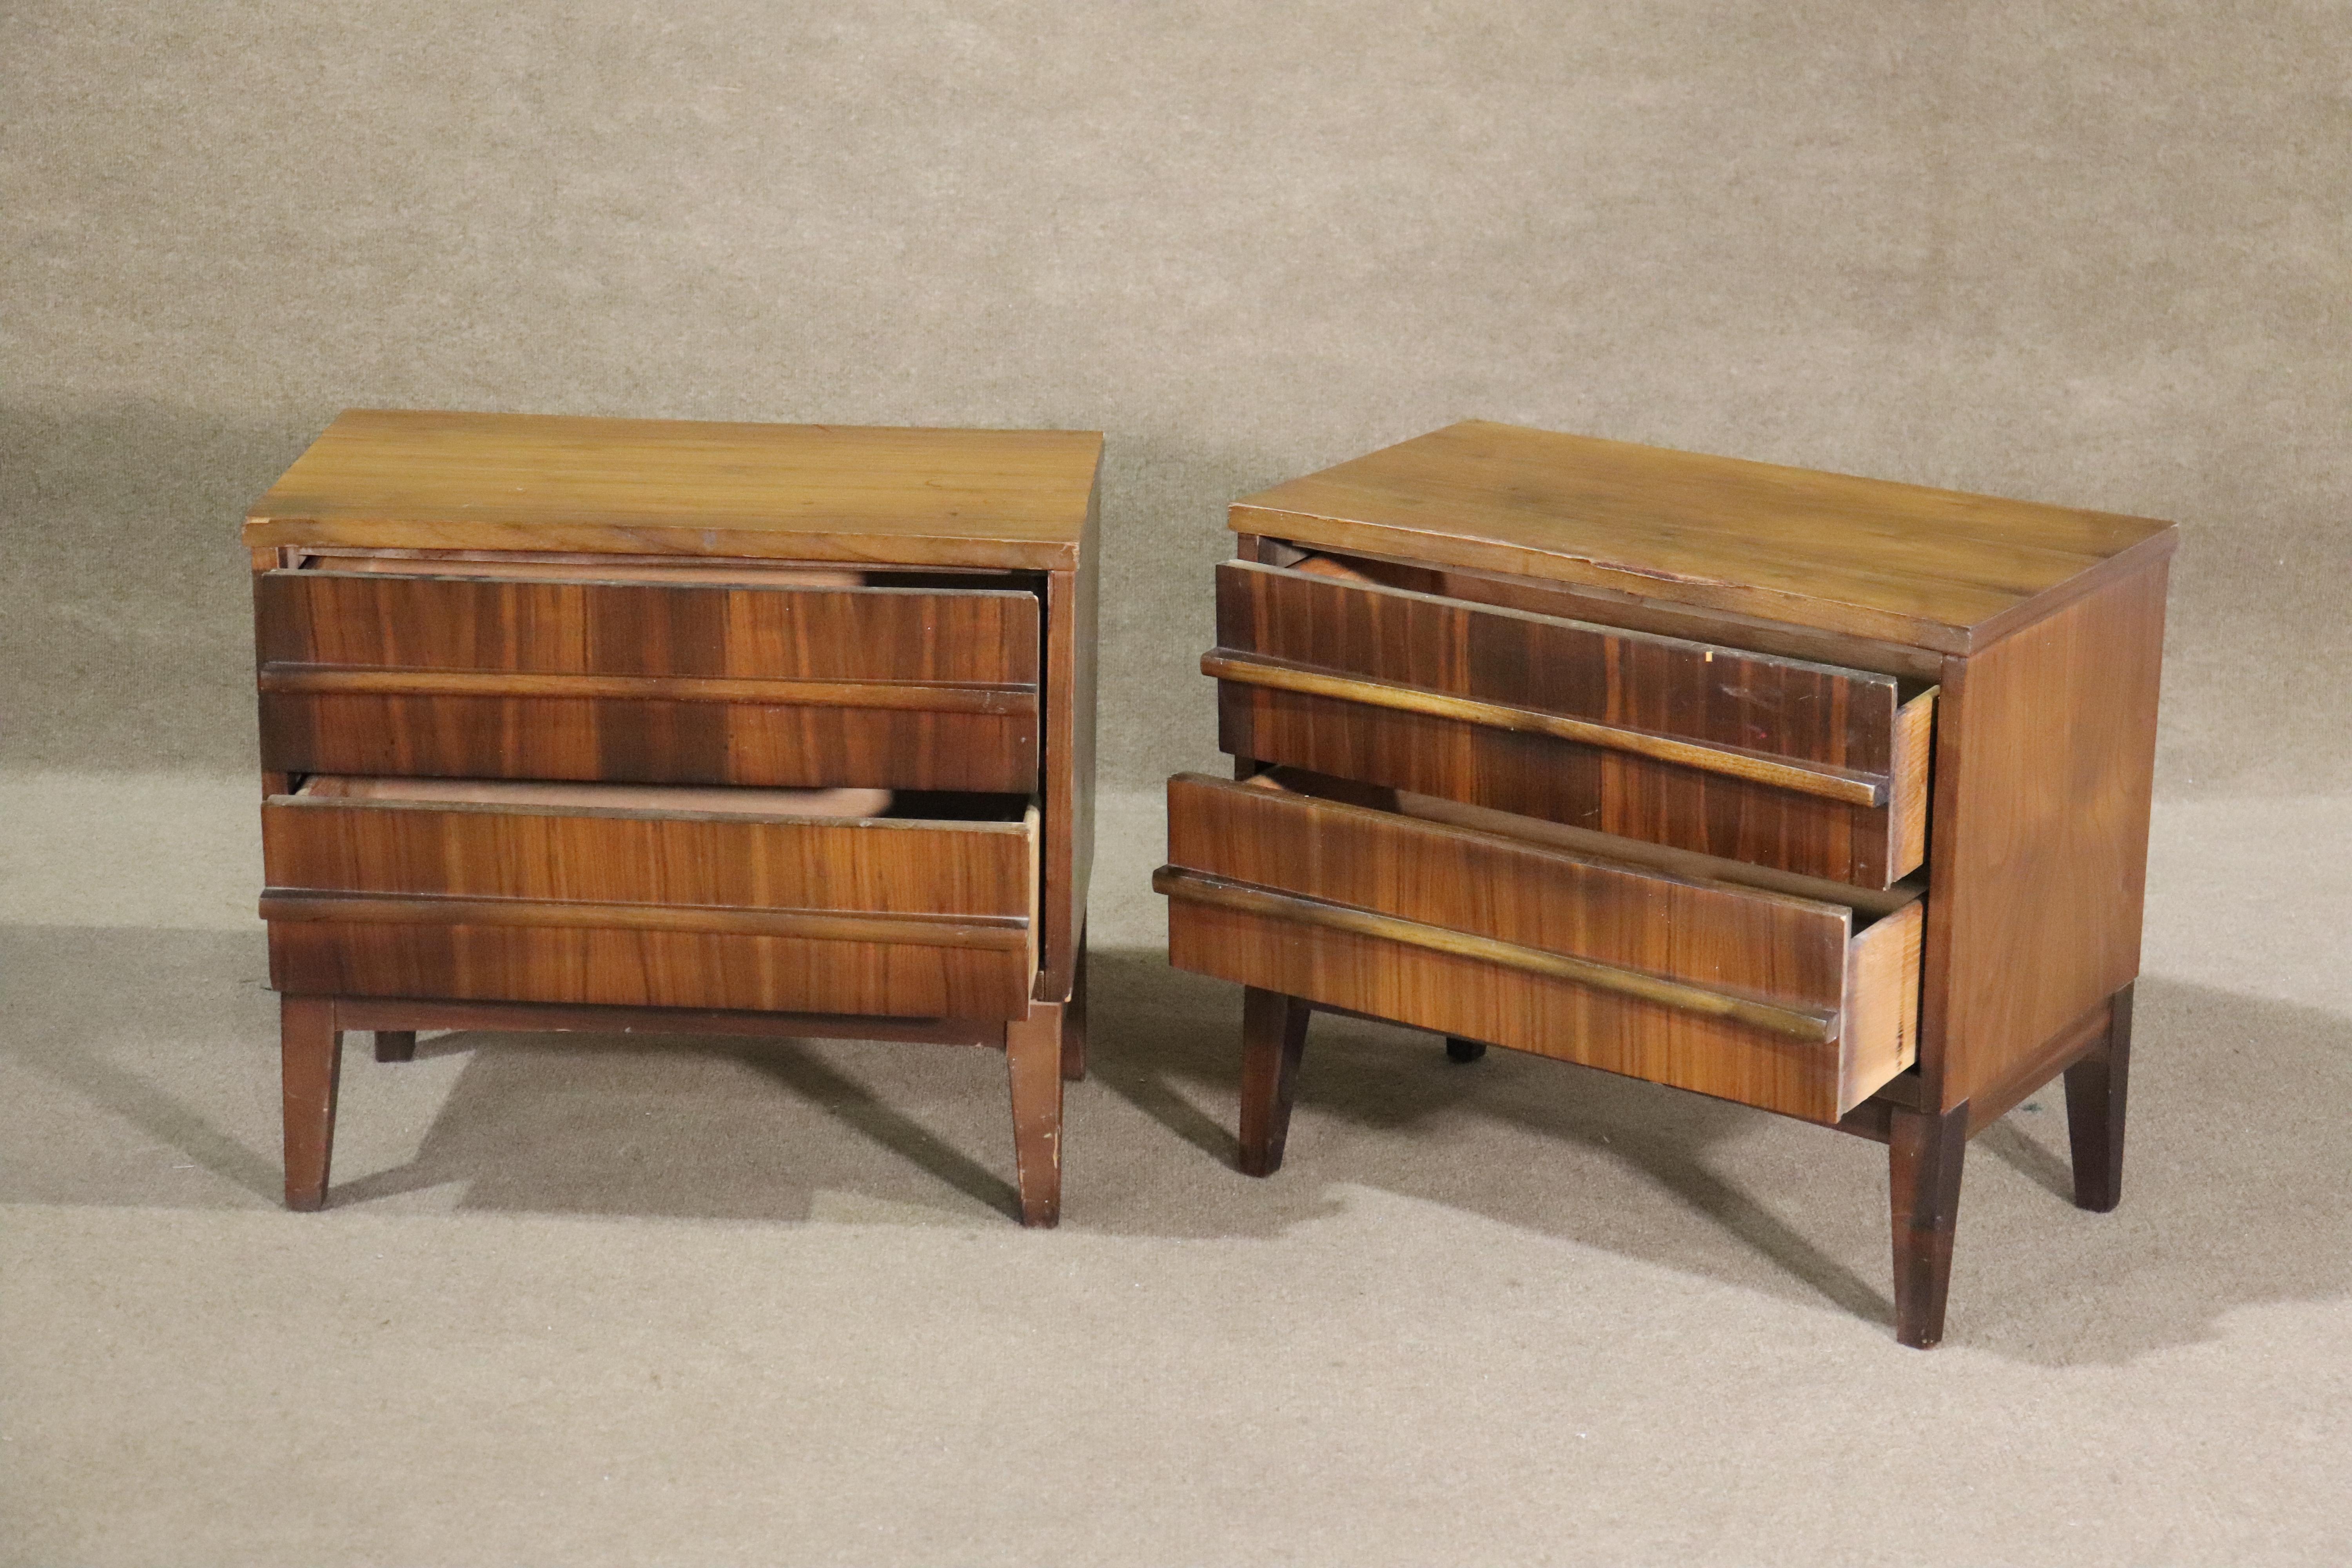 Pair of walnut end tables with two drawer storage. Great for living room or bedroom use.
Please confirm location NY or NJ